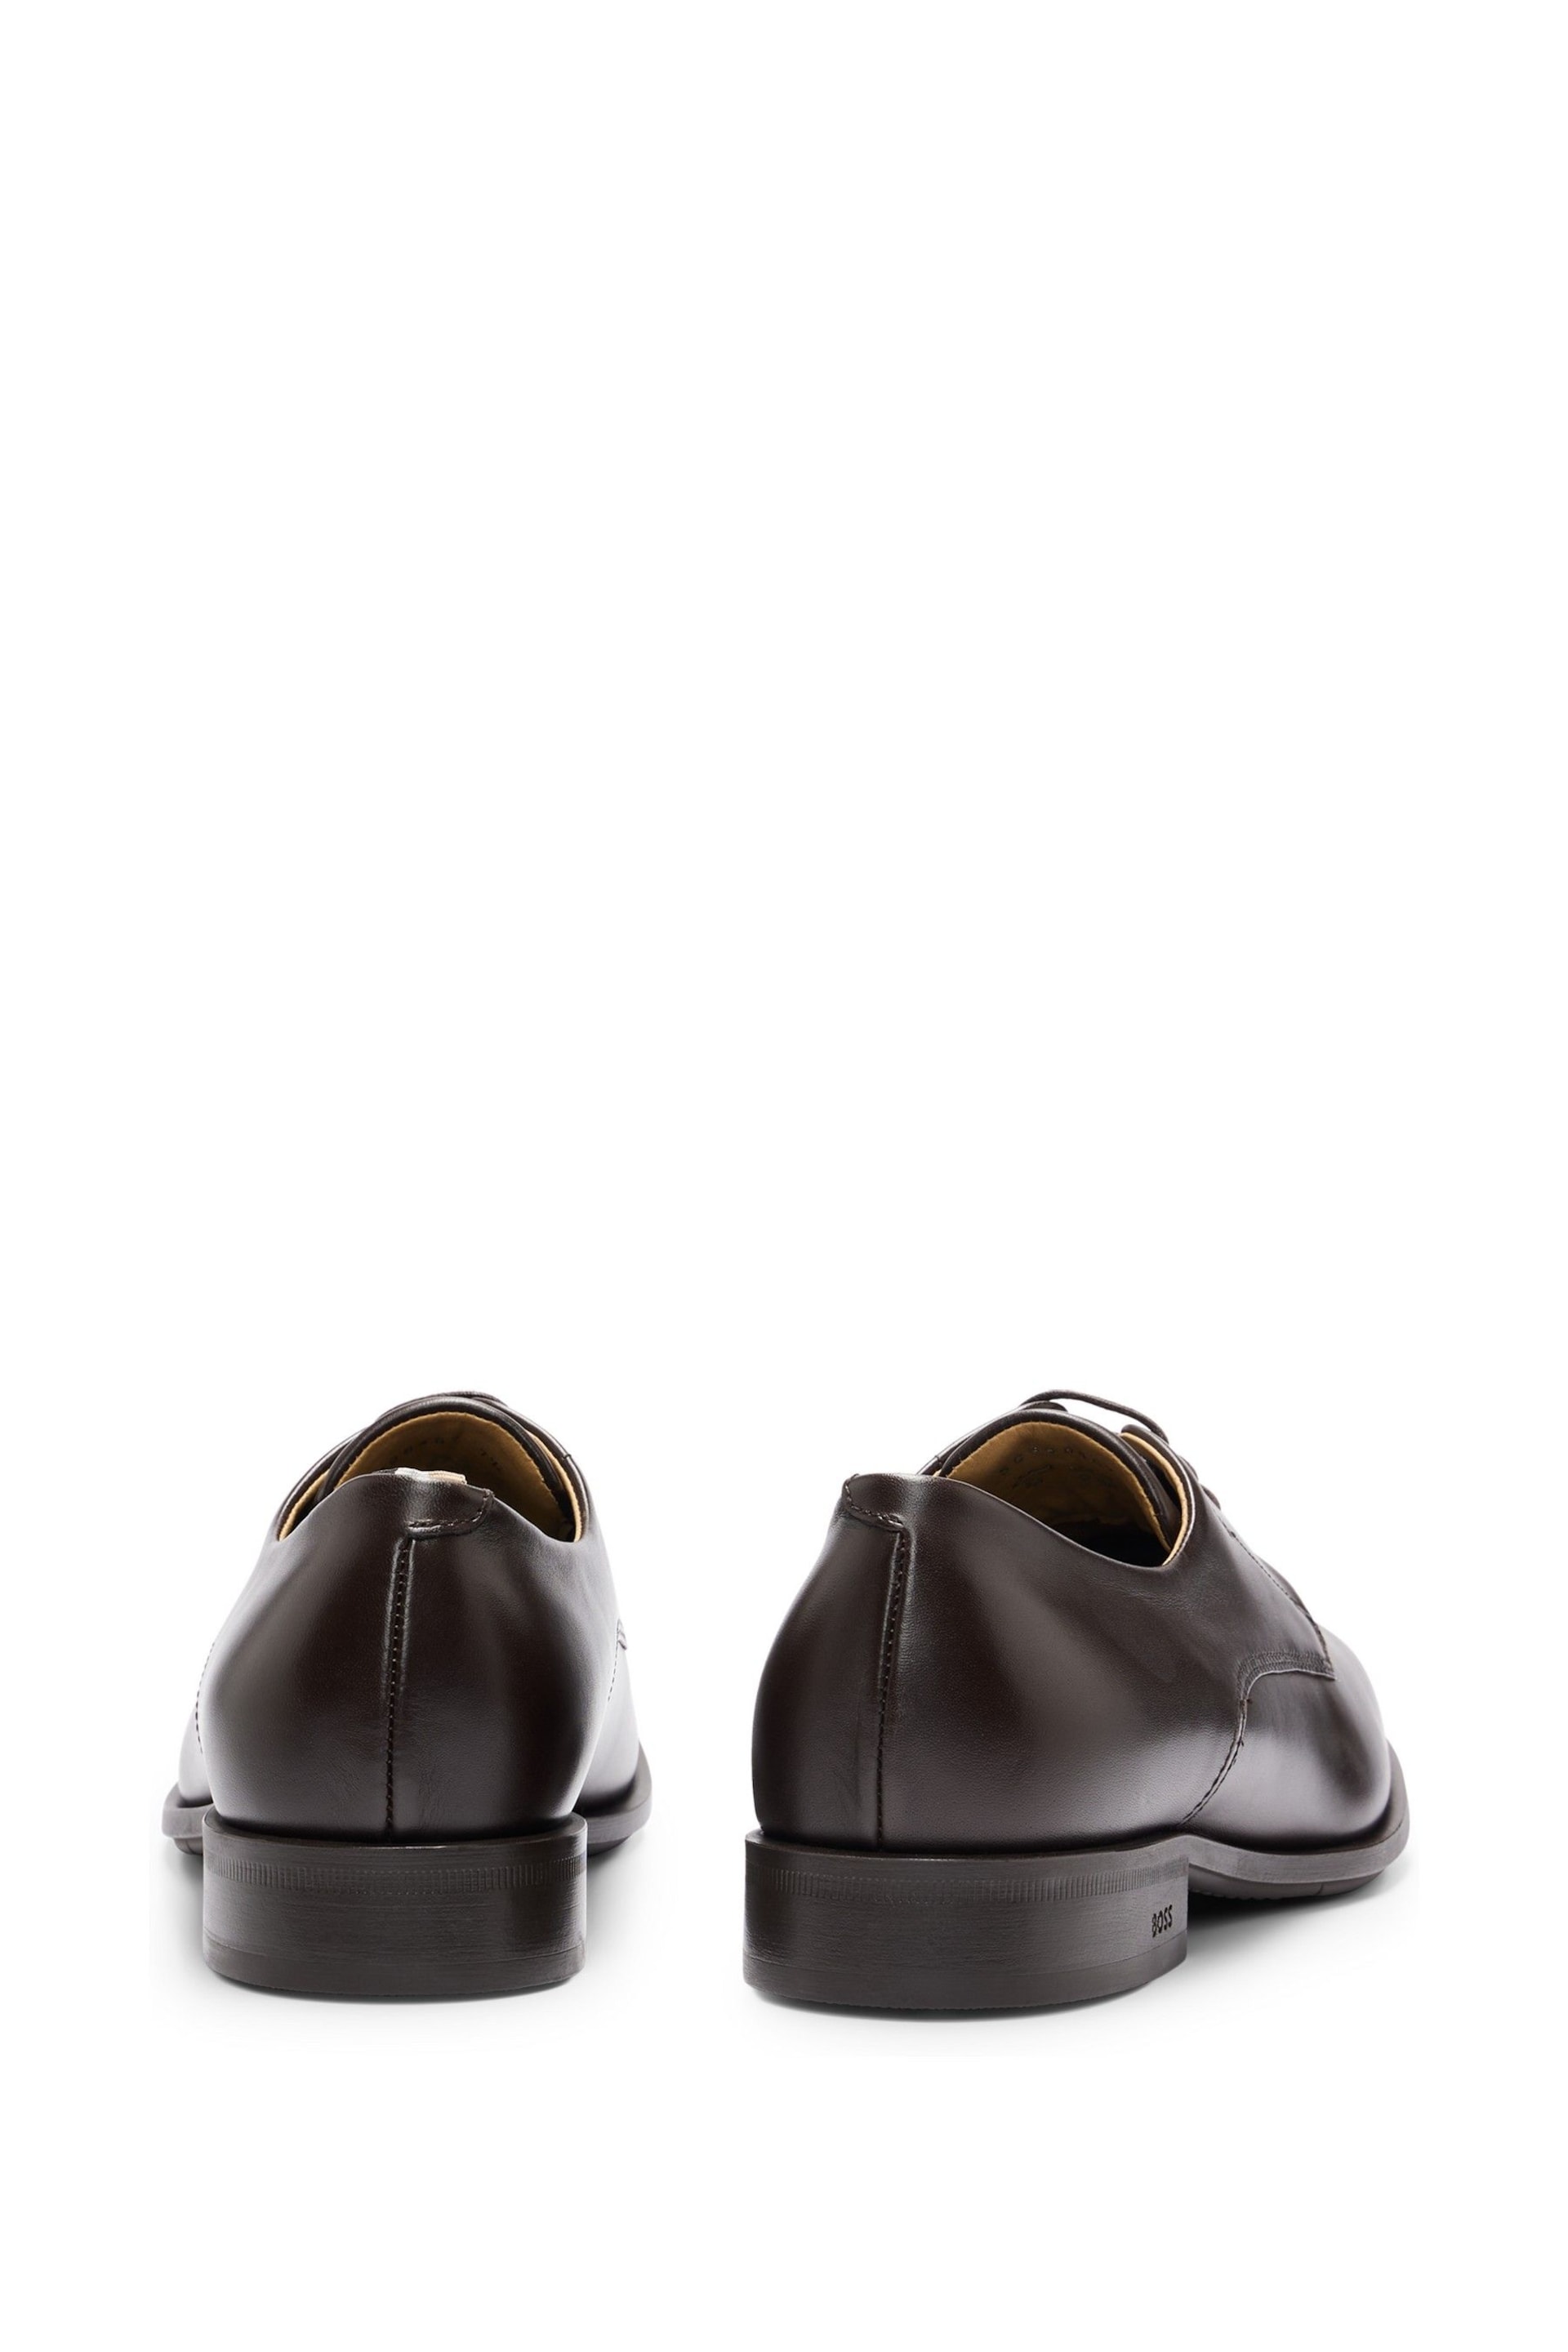 BOSS Brown Colby Leather Derby Shoes - Image 3 of 3